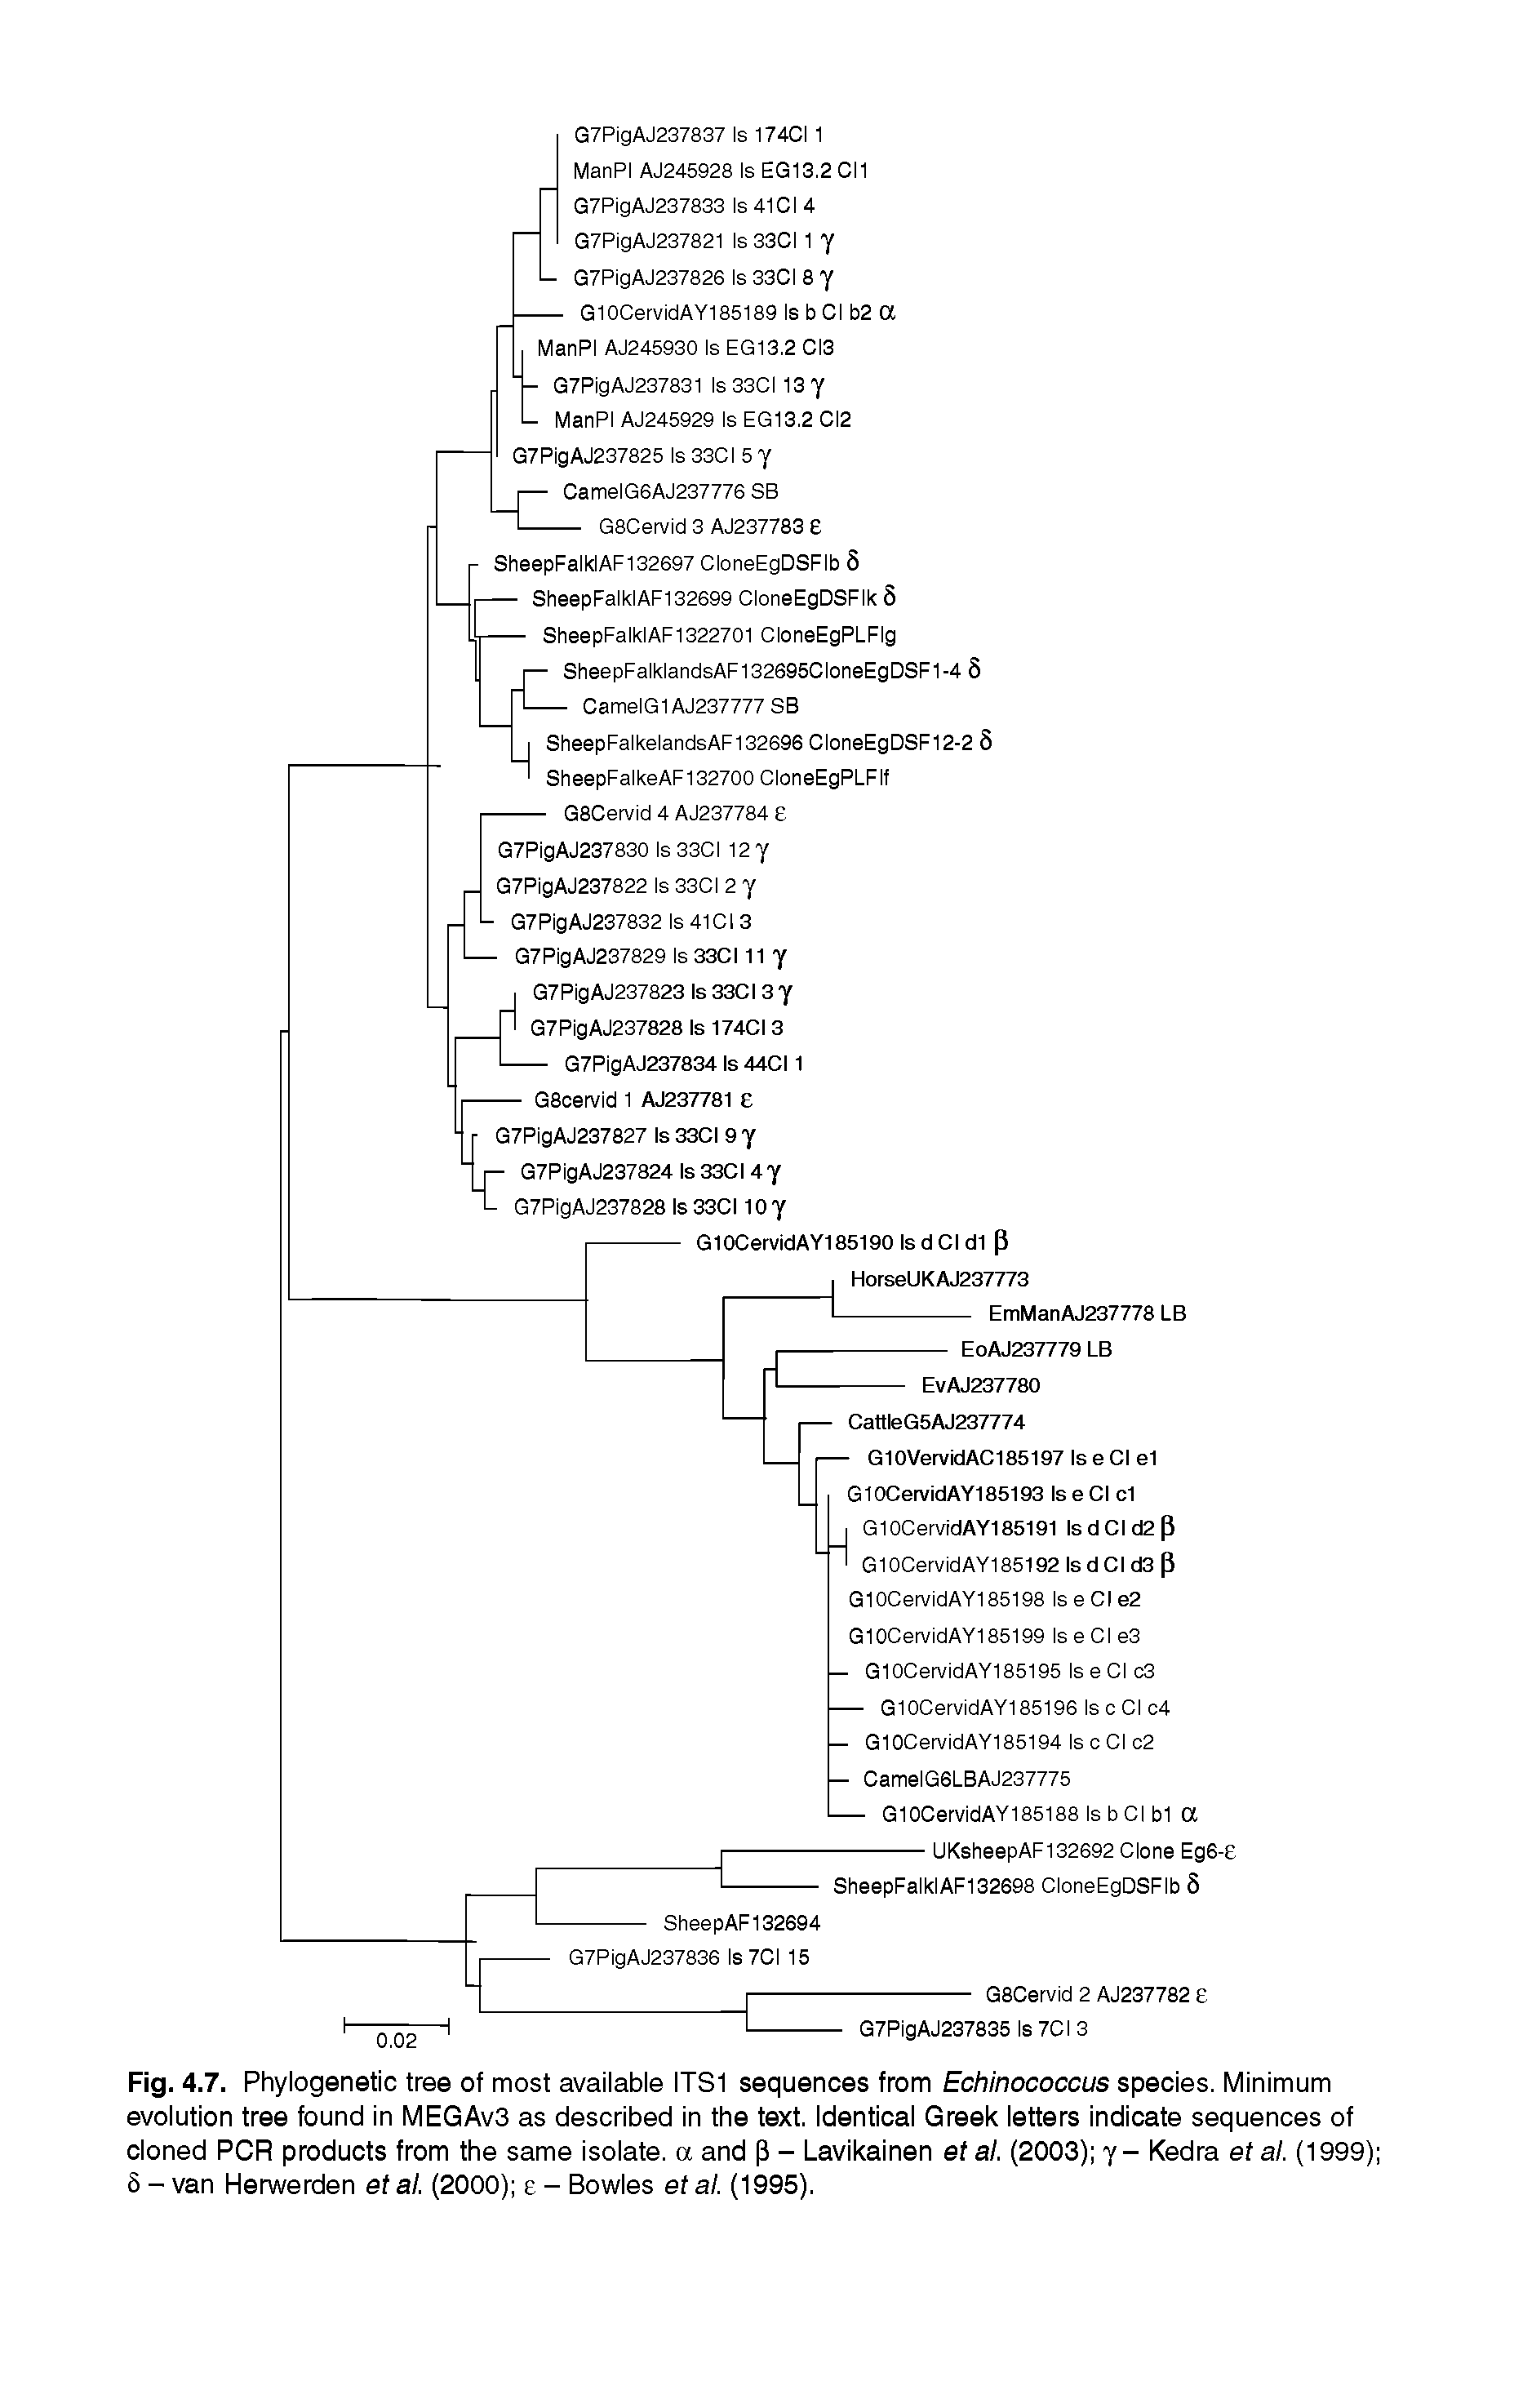 Fig. 4.7. Phylogenetic tree of most available ITS1 sequences from Echinococcus species. Minimum evolution tree found in MEGAv3 as described in the text. Identical Greek letters indicate sequences of cloned PCR products from the same isolate, a and p - Lavikainen et al. (2003) y- Kedra et al. (1999) 8 - van Herwerden et al. (2000) e - Bowles et al. (1995).